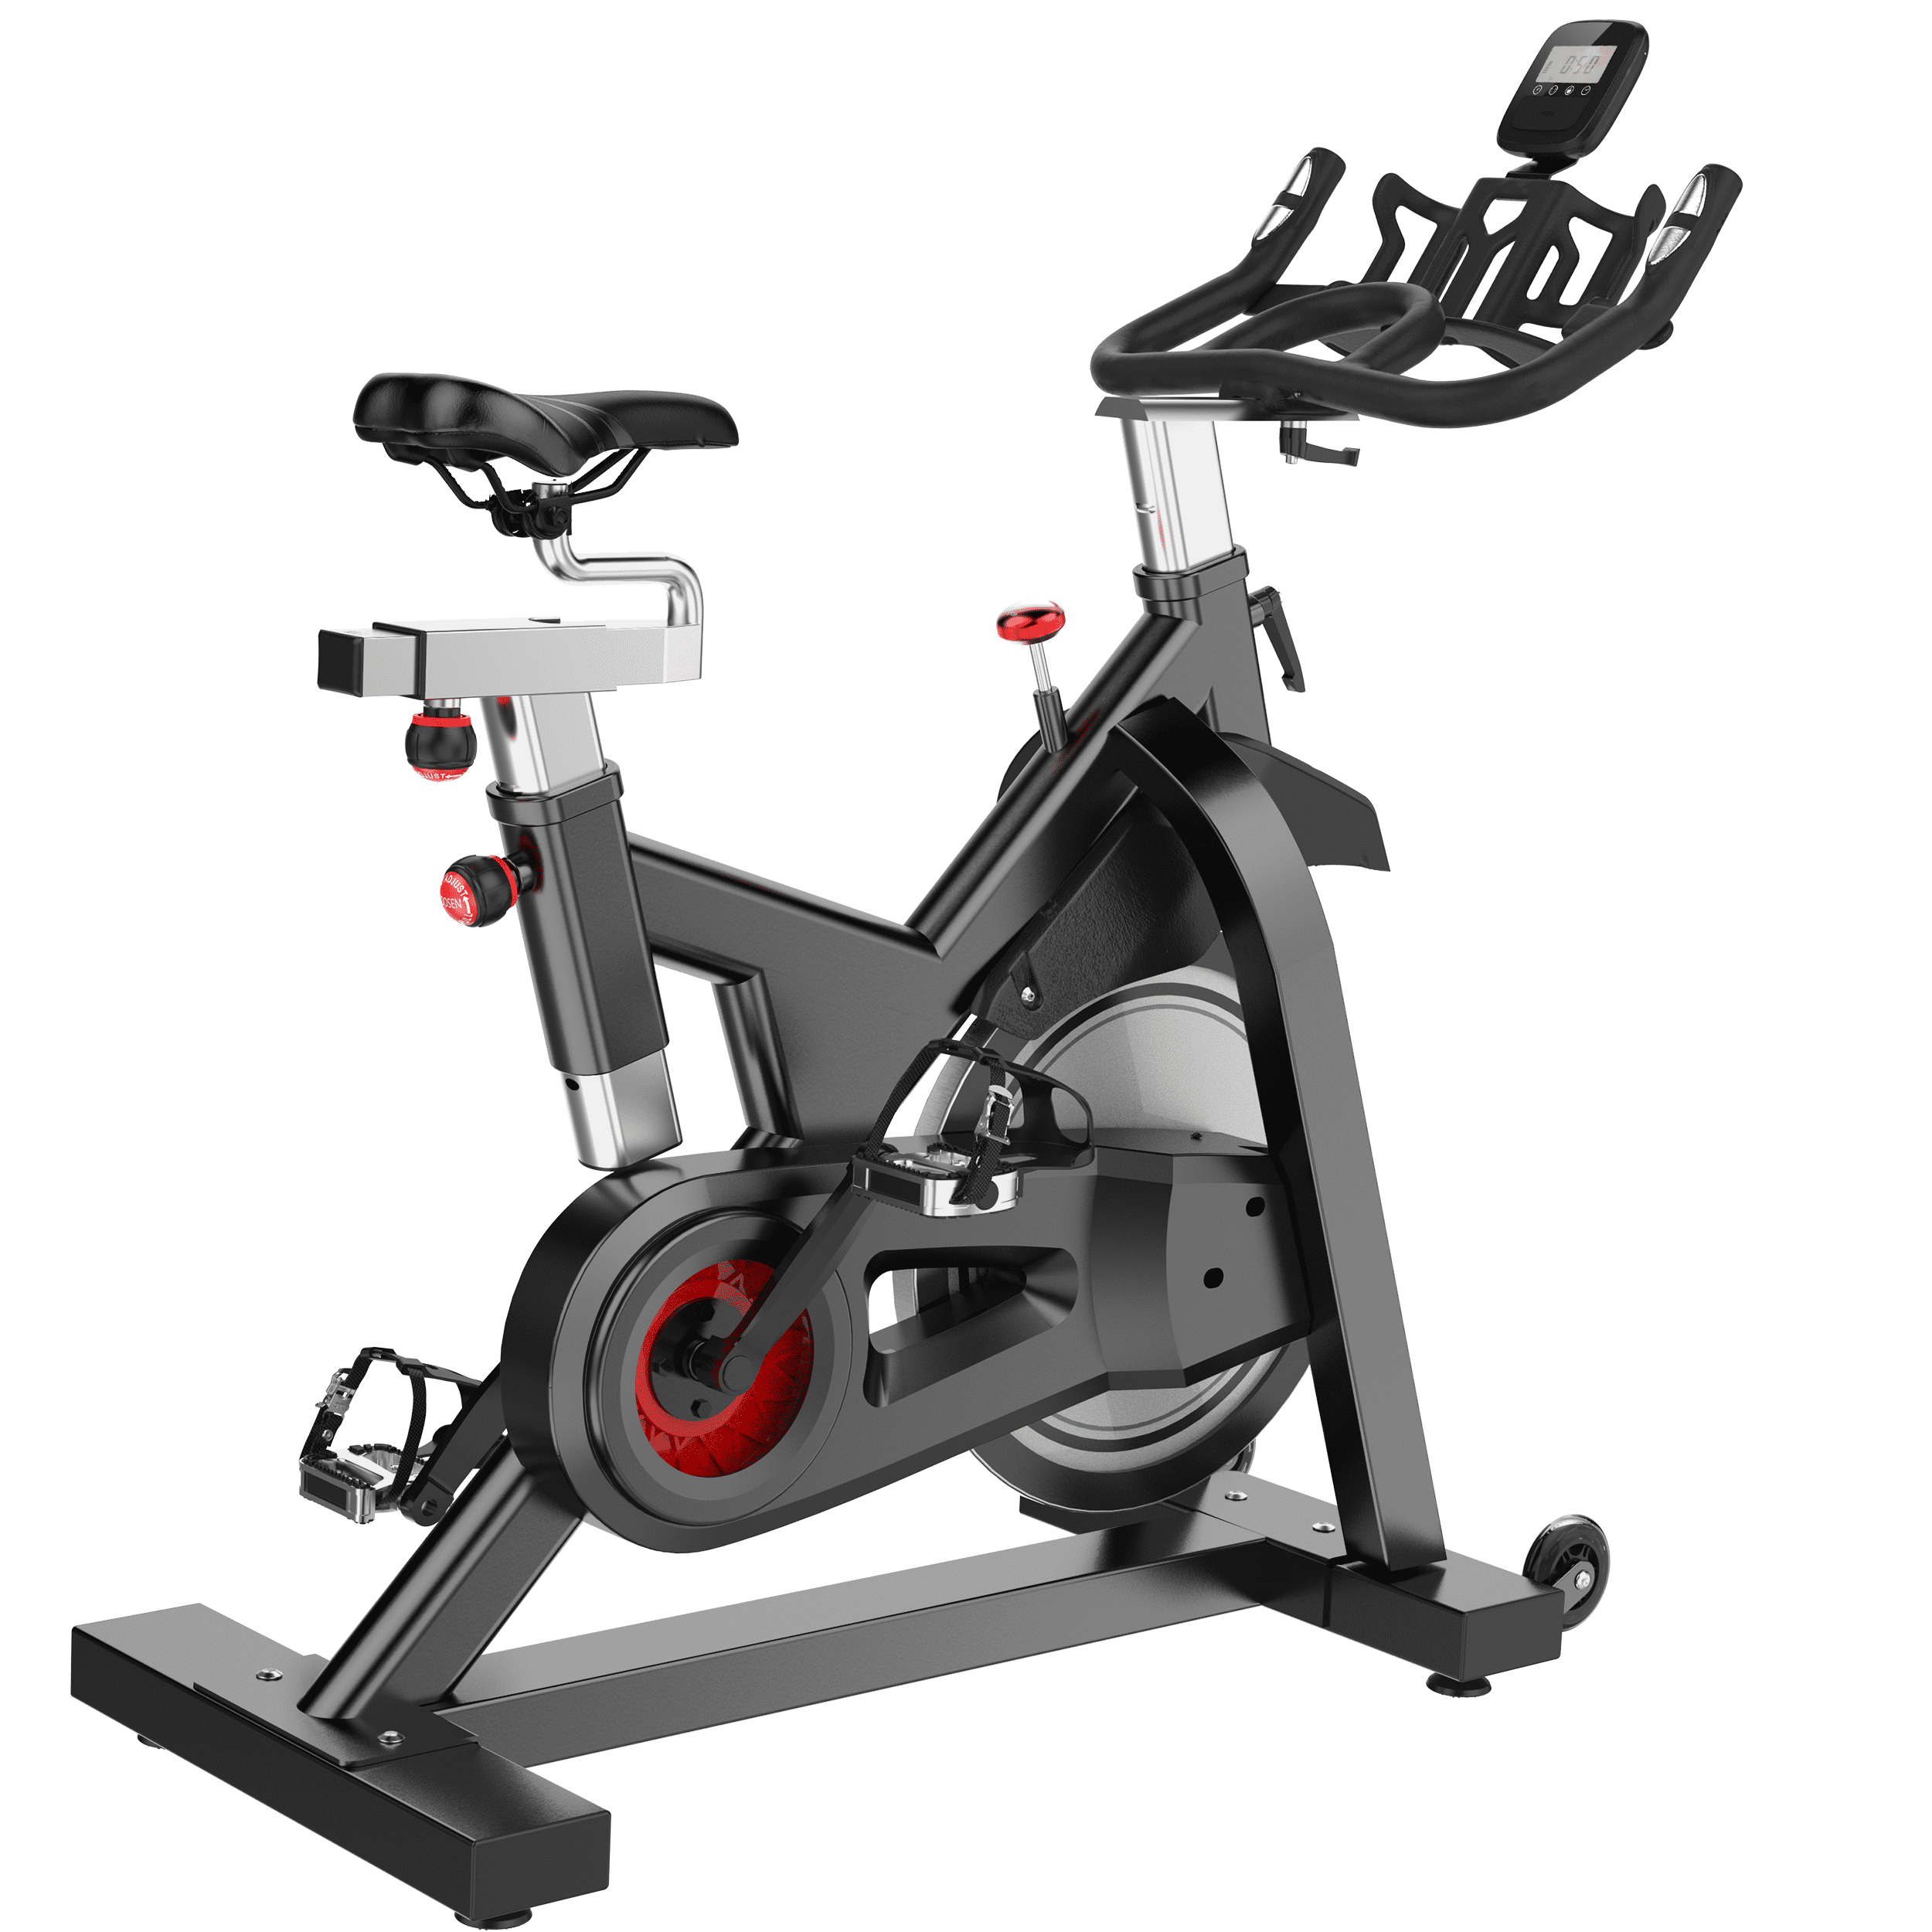 FBSPORT Exercise Bike,Workout Bike Stationary with Comfortable Seat Cushion & LCD Monitor,Belt Drive Indoor Cycling Bike with 265Lbs Weight Capacity for Home Workout 